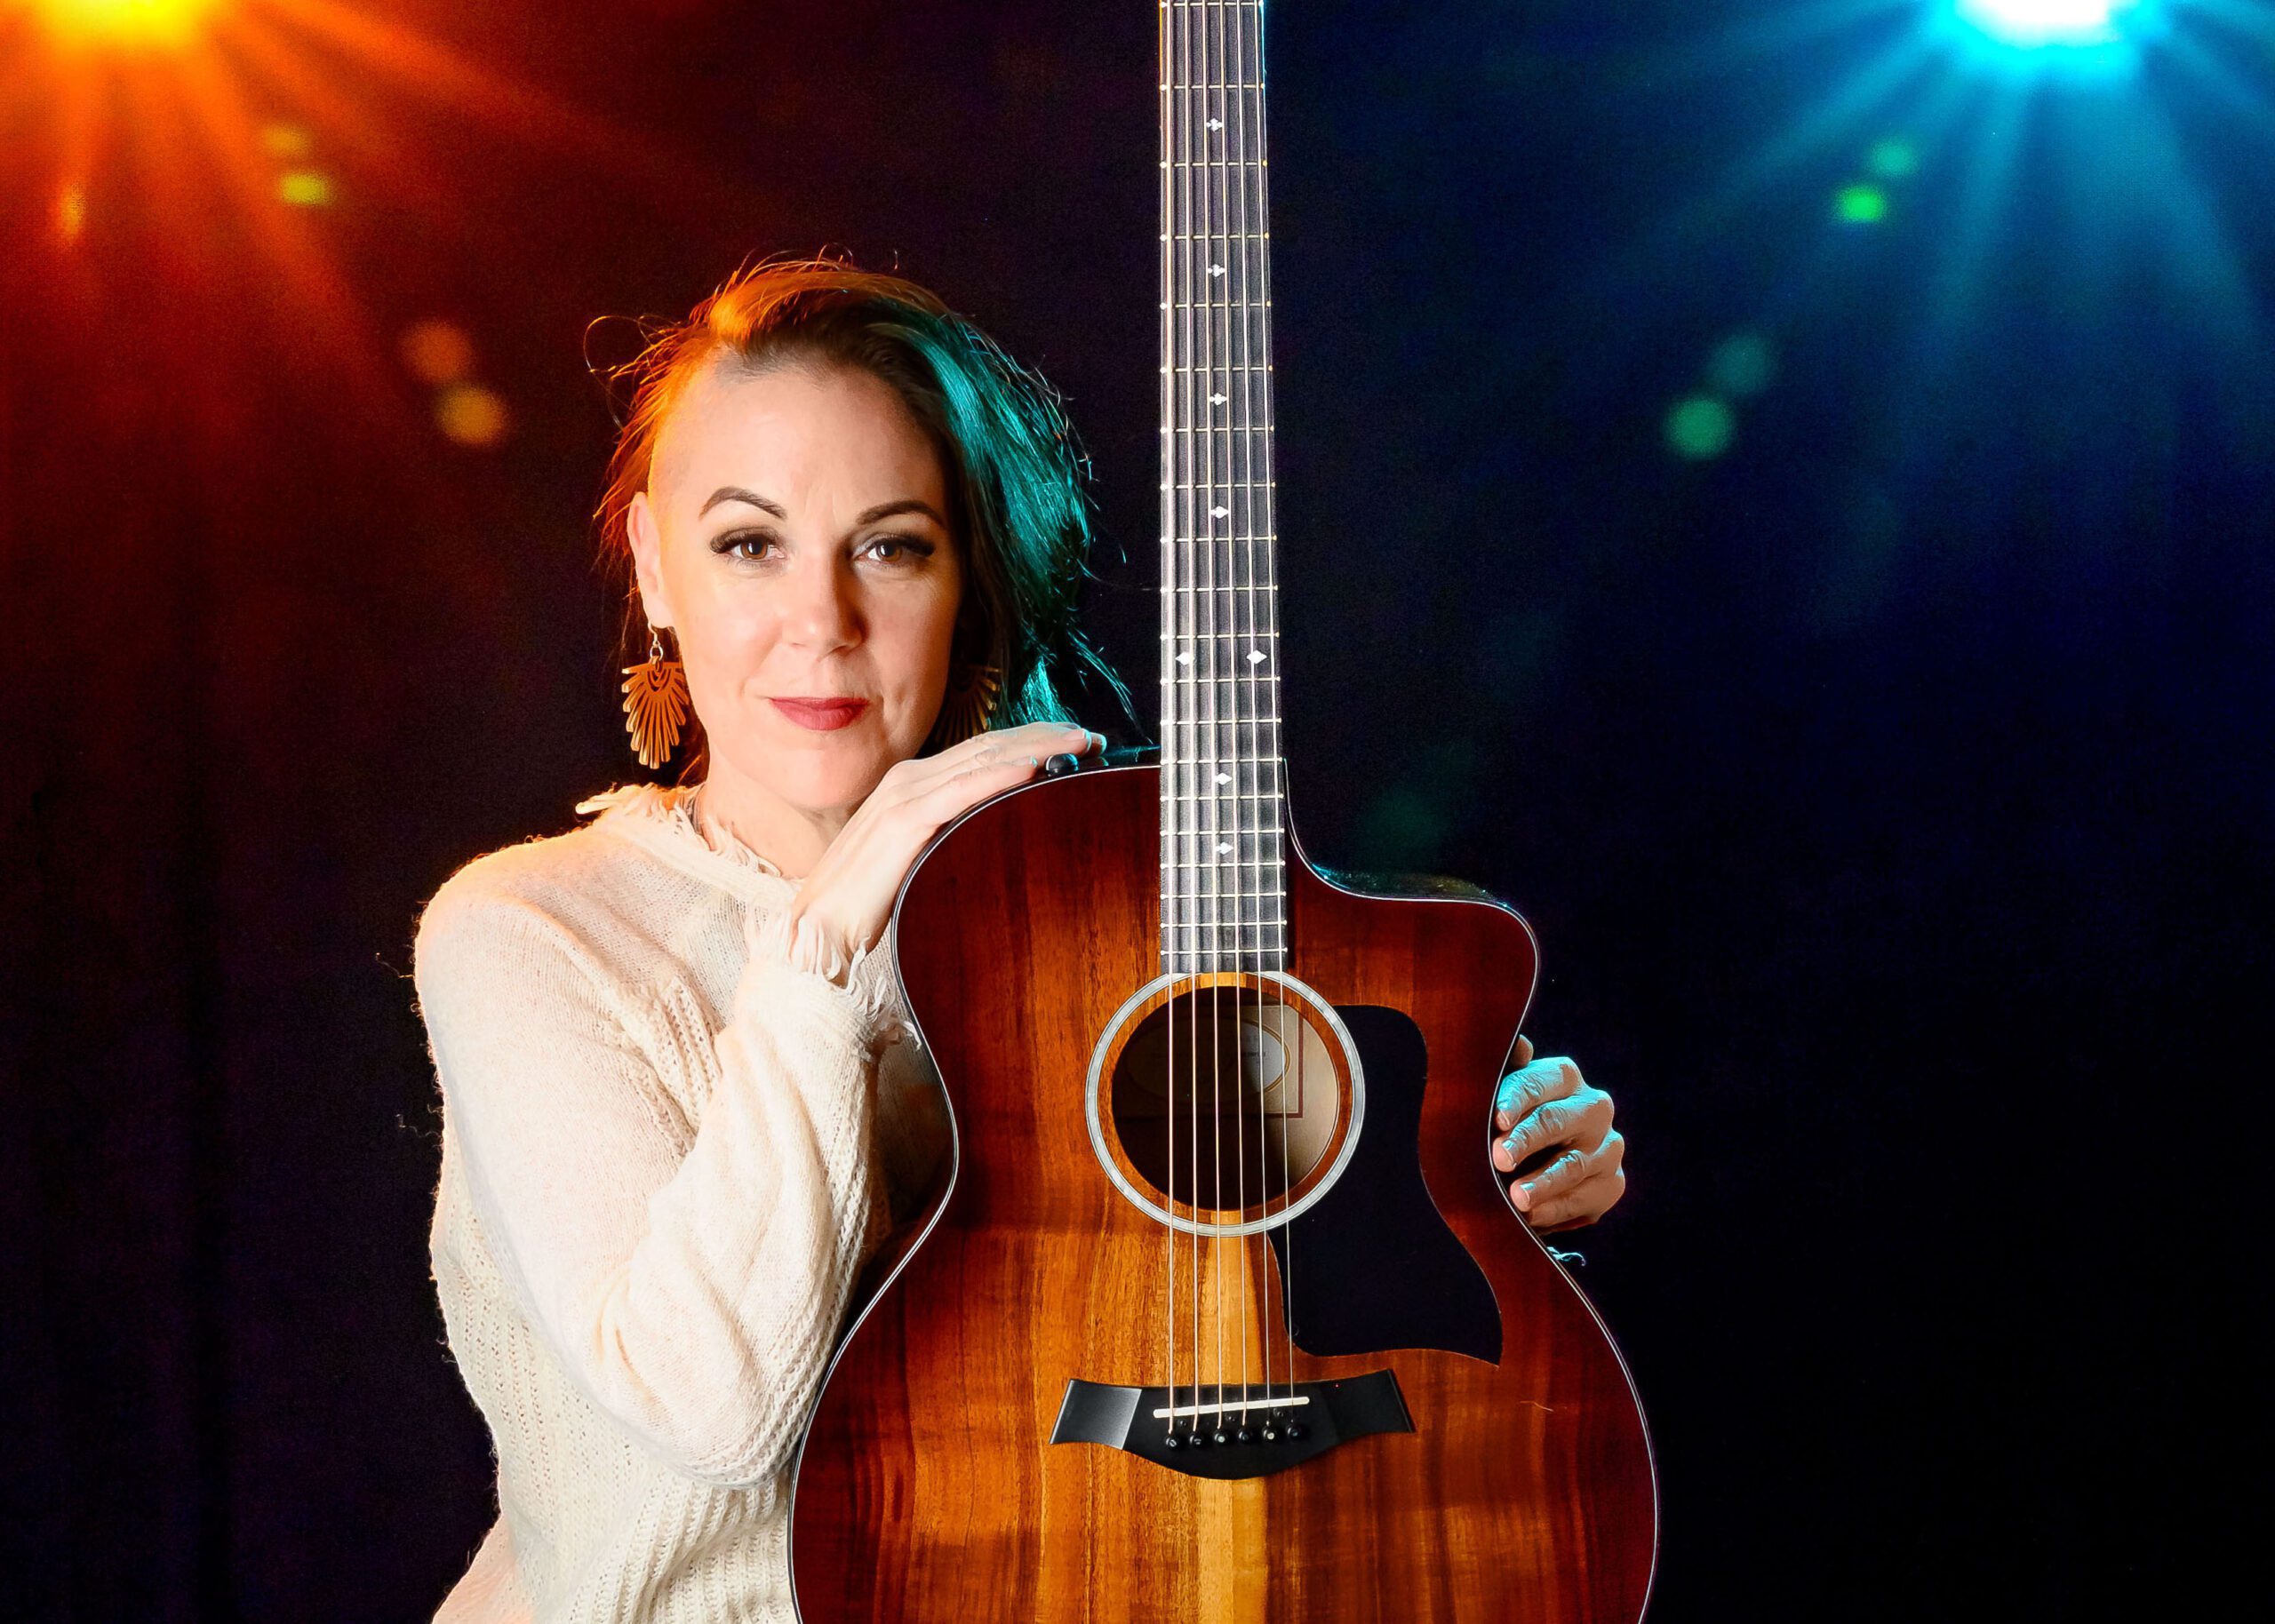 Professional photography of Woman sitting on a stool holding a guitar with colorful lights behind her